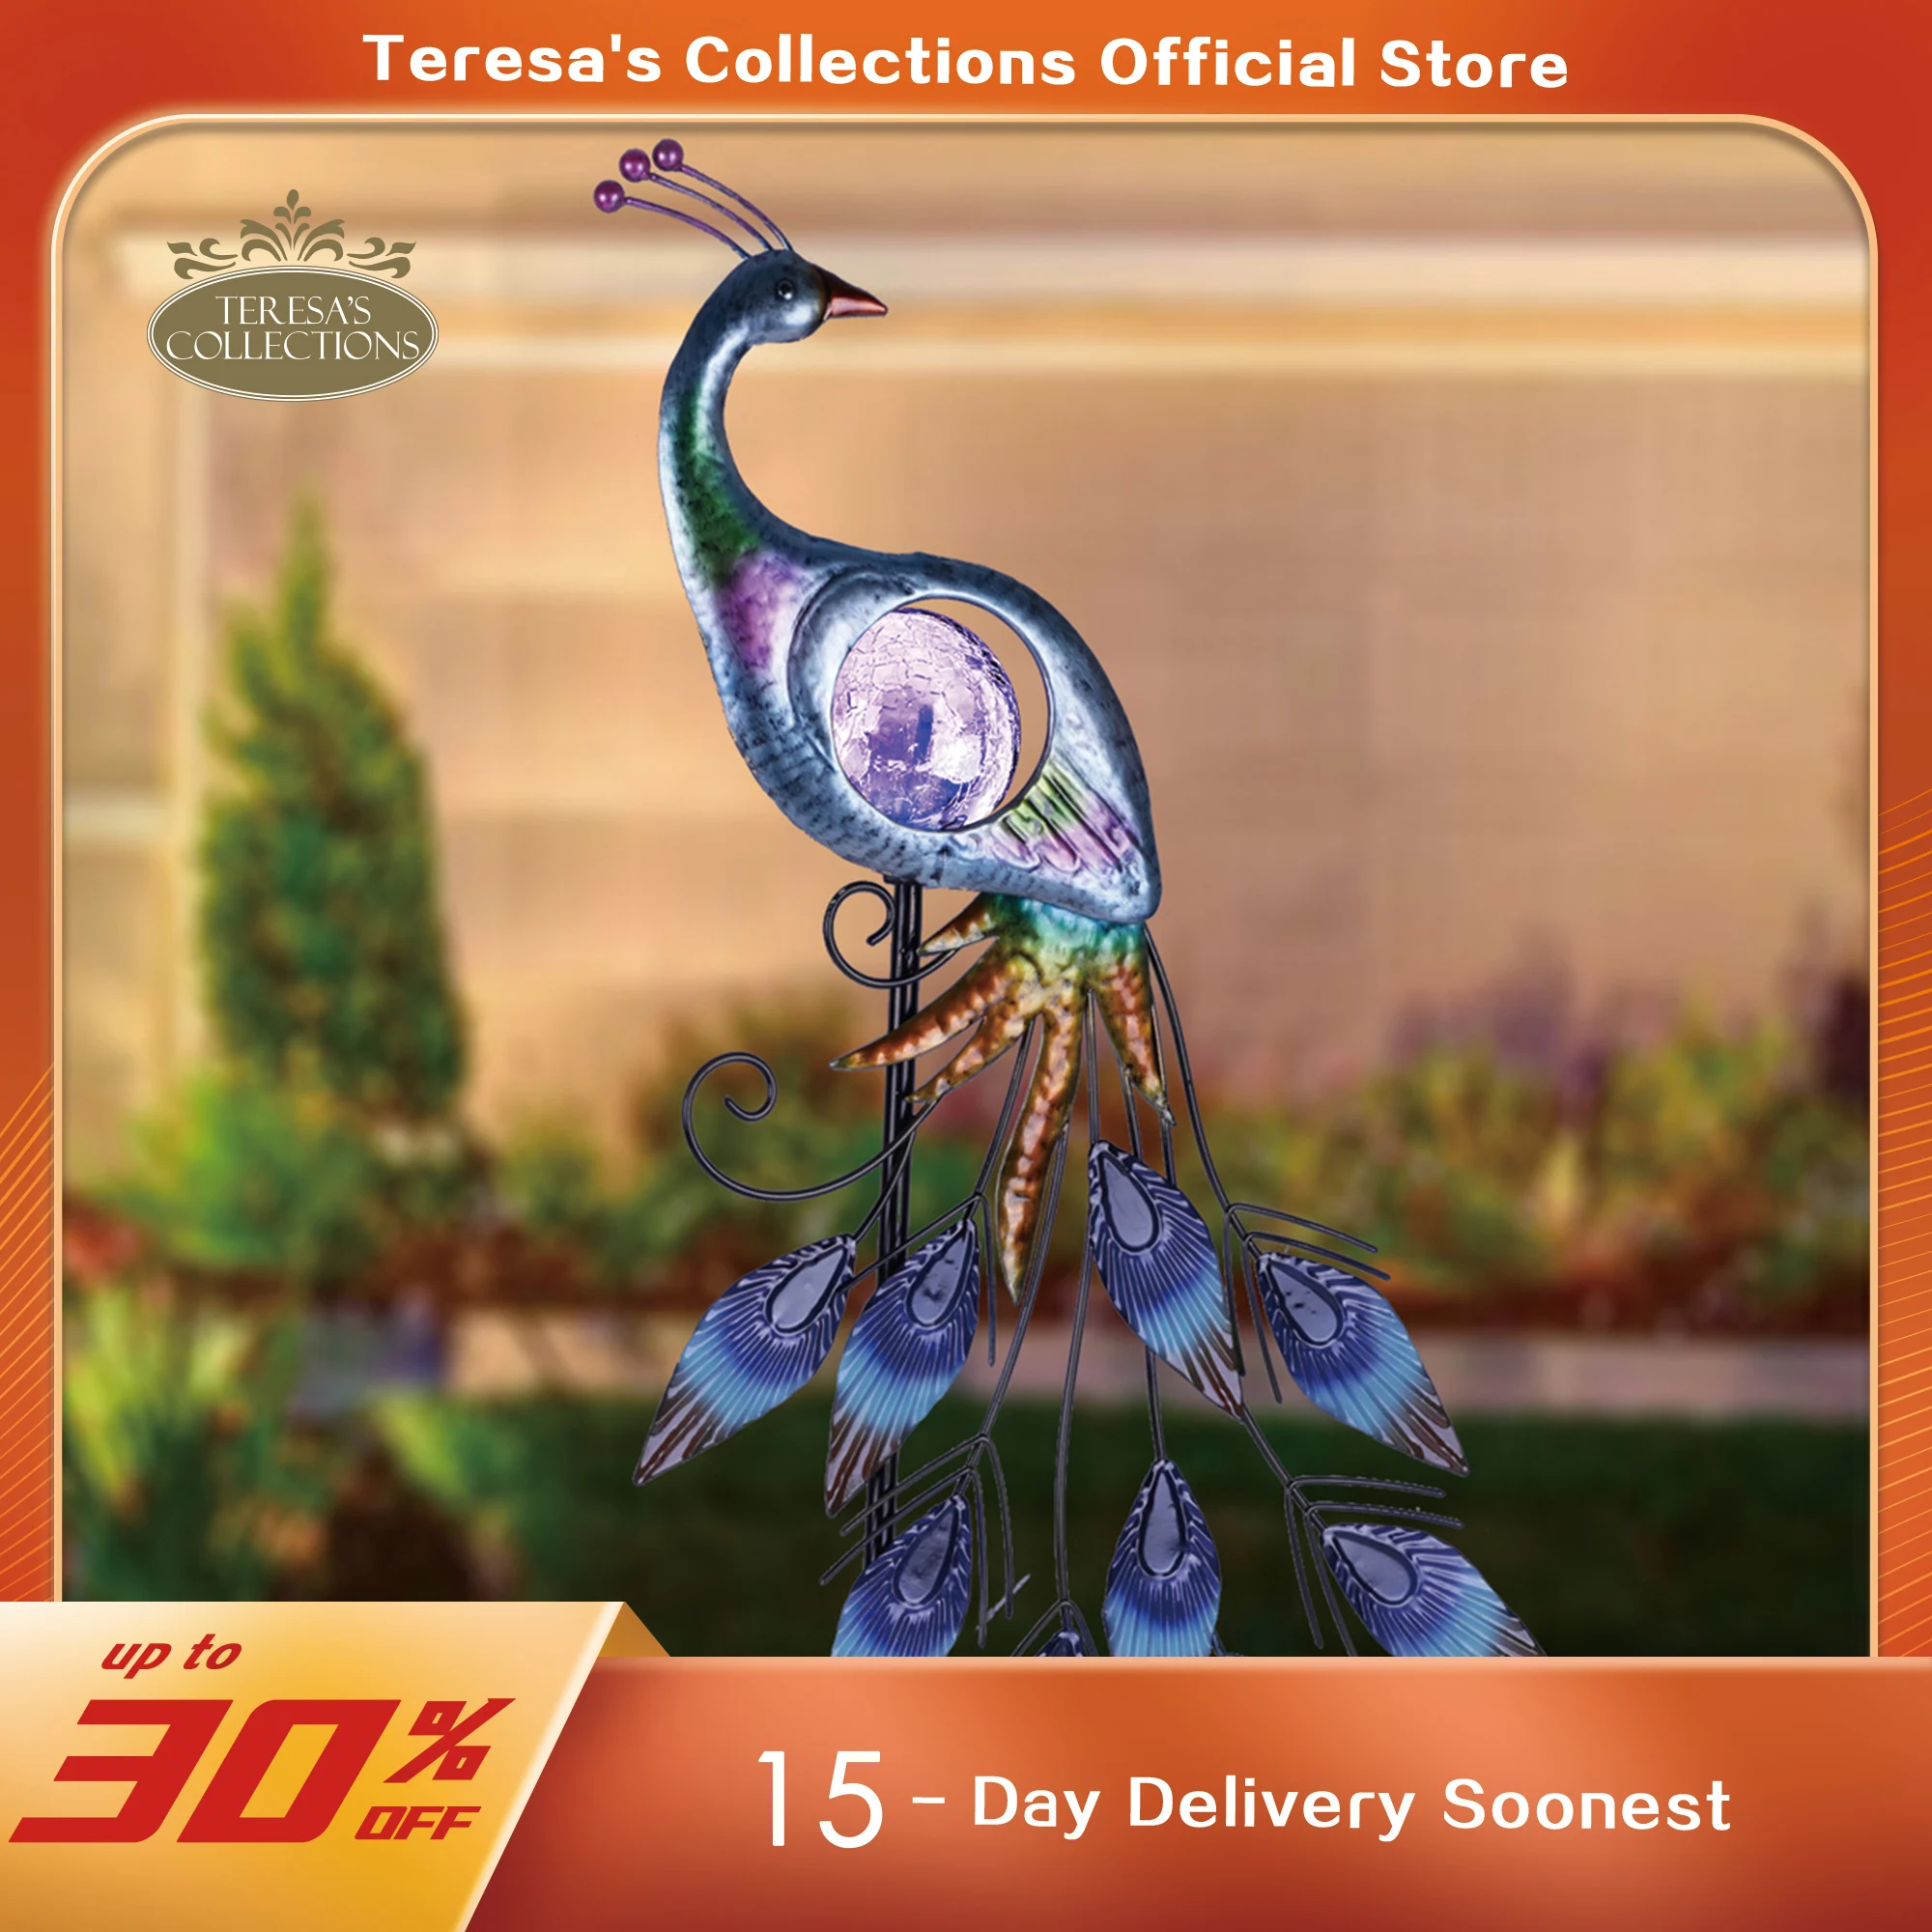 TERESA'S COLLECTIONS Garden Solar Light Peacock Statues LED Lamp Yard Lawn Stake Landscape Yard Path Outdoors Court Decoration